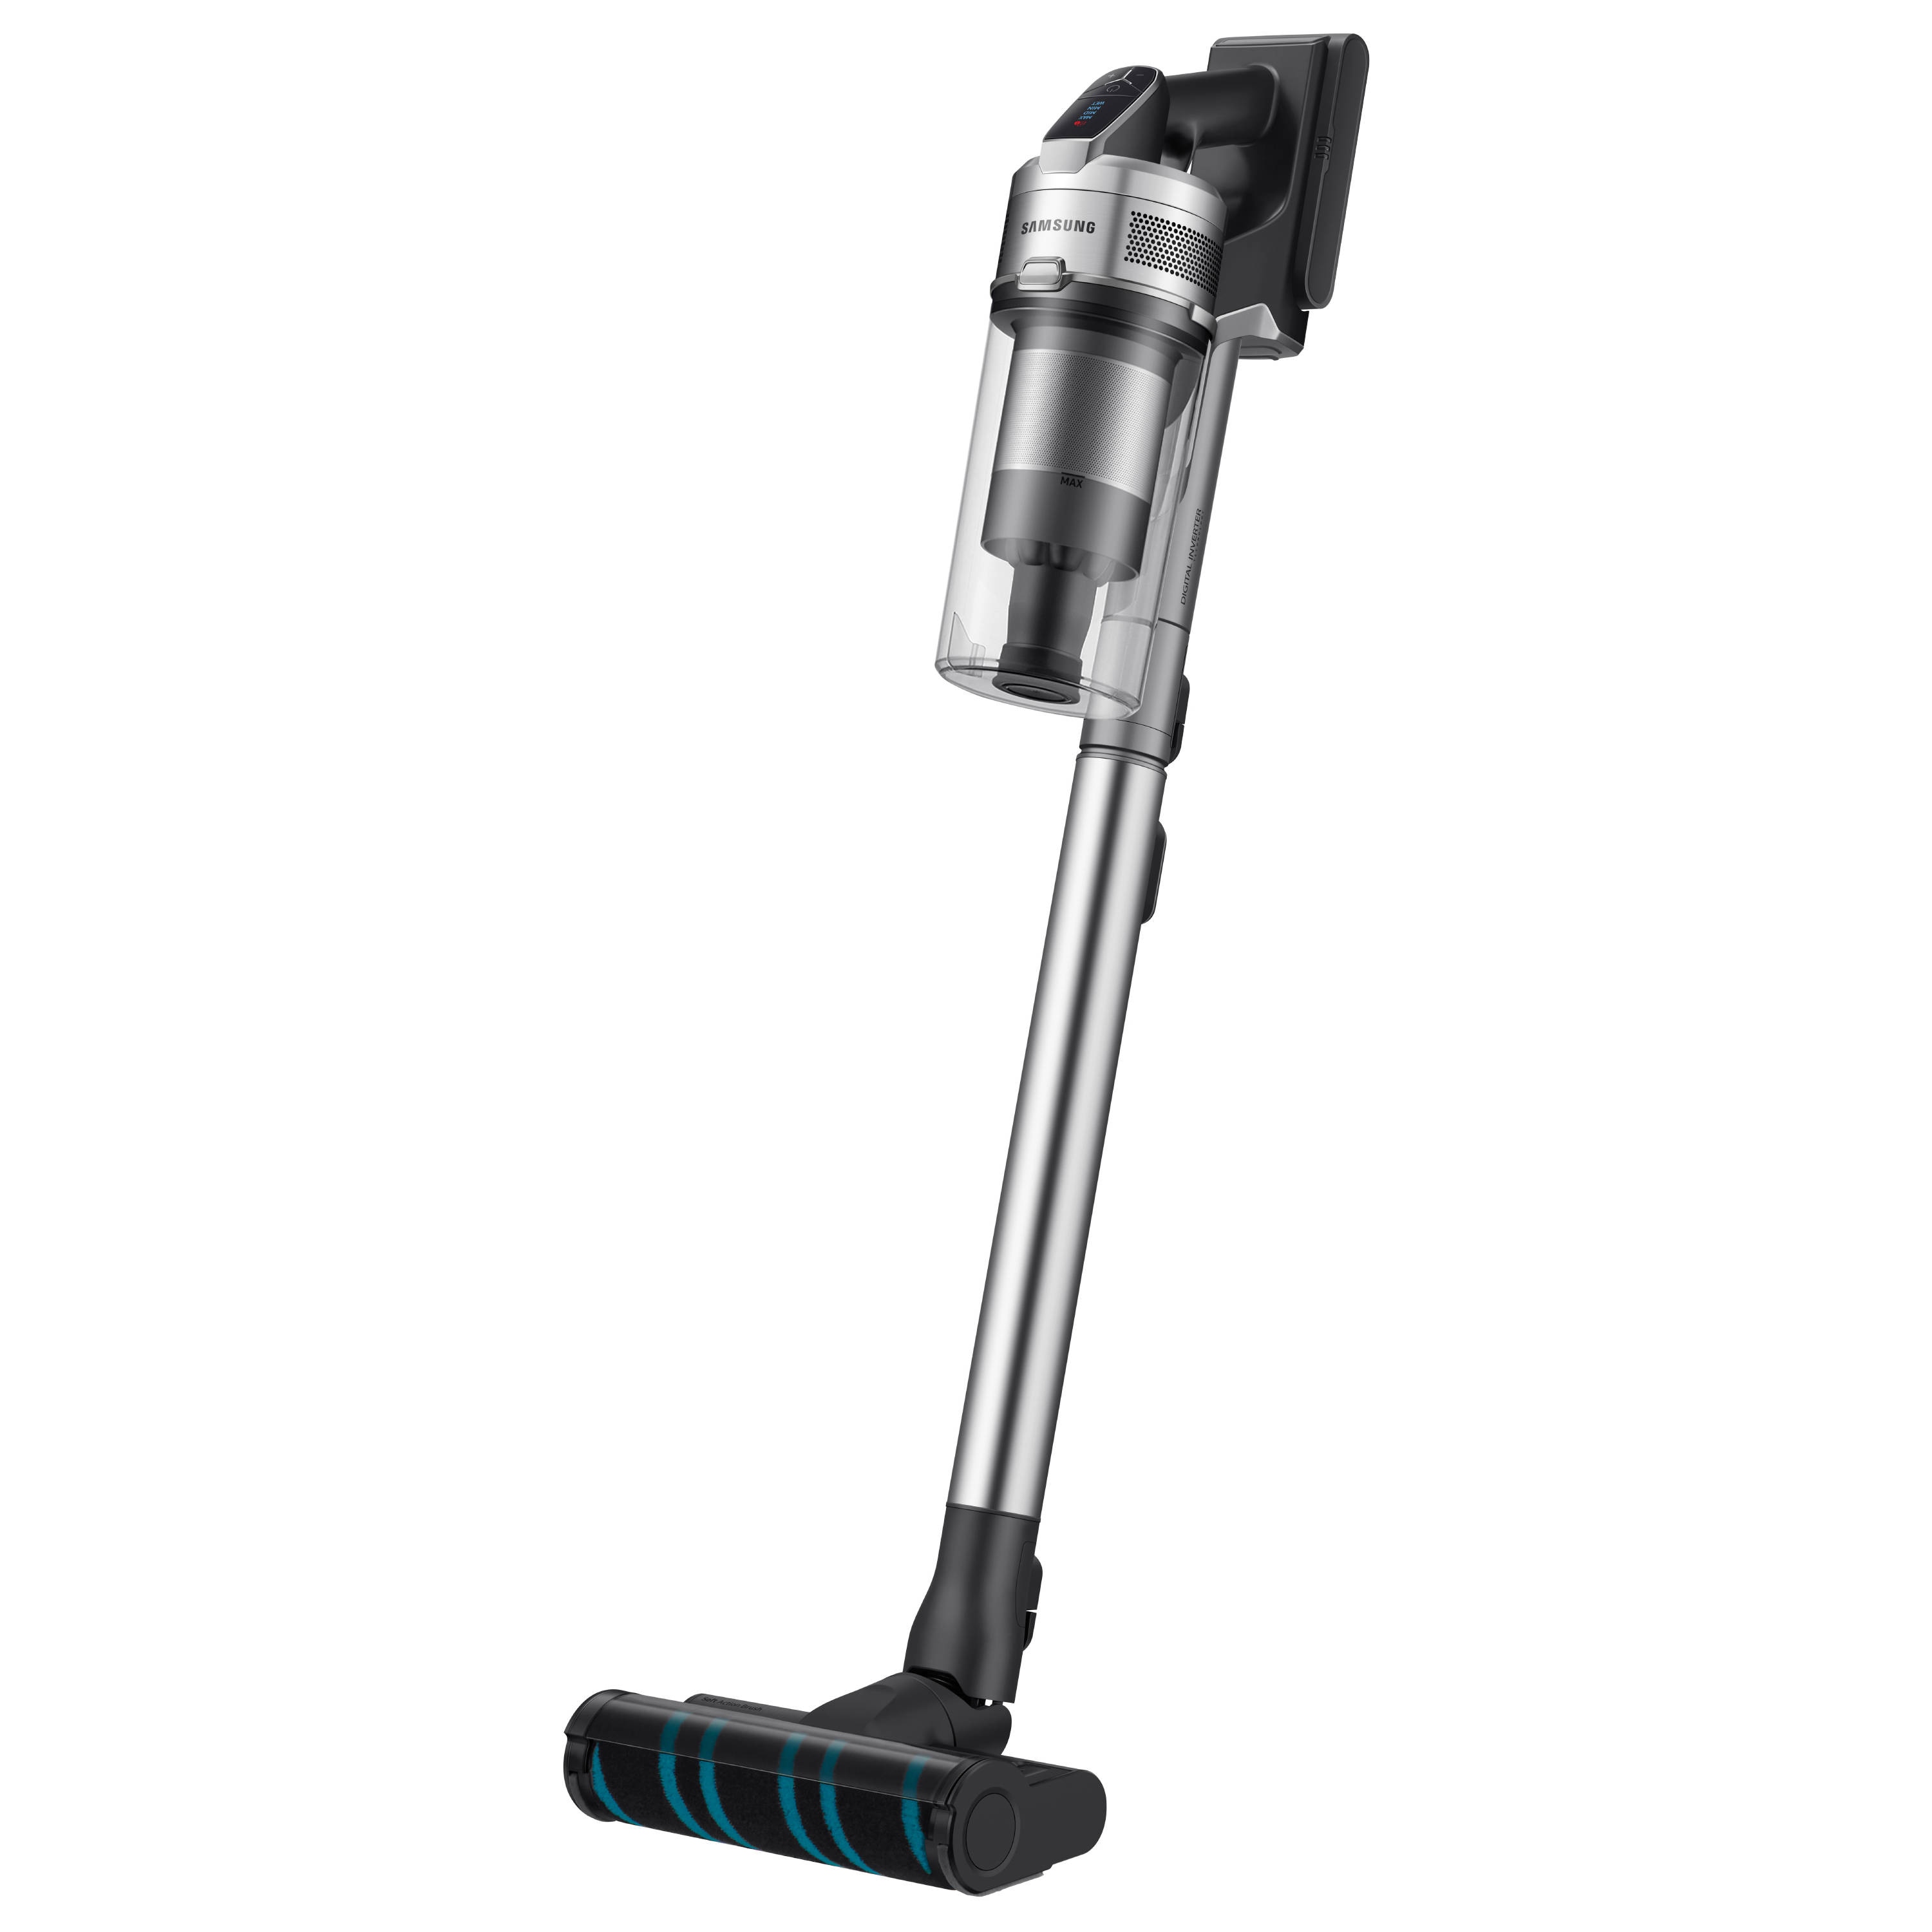 Samsung Jet 90 department in Station Vacuums and the 21.9 (Convertible To Stick at Handheld) Bundle Stick Cordless Volt Pet Clean Vacuum